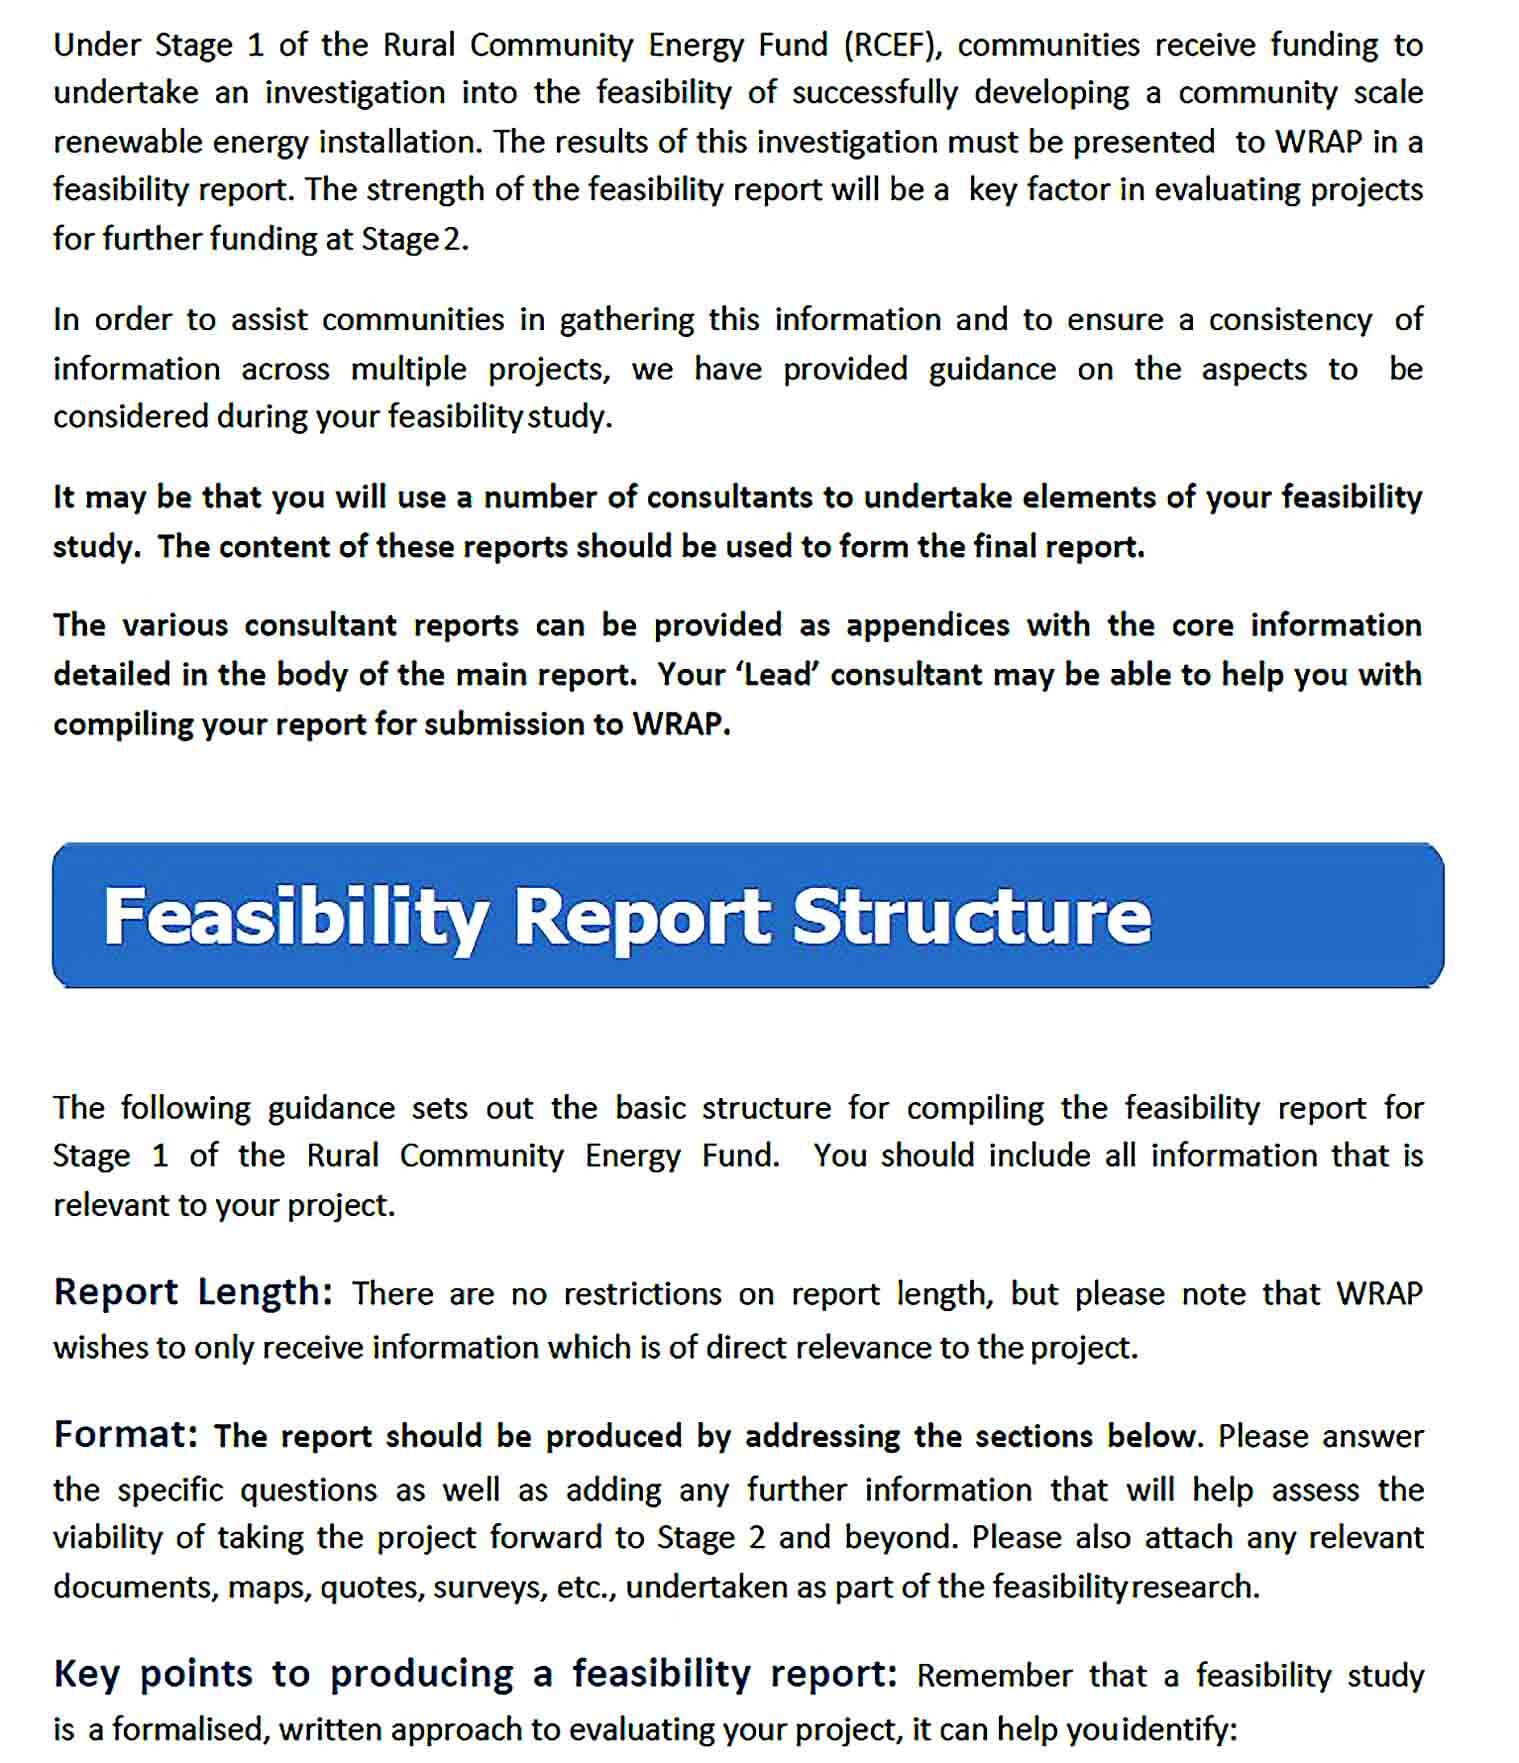 Sample RCEF Stage 1 Feasibility Report Structure Nov 2015 0 1